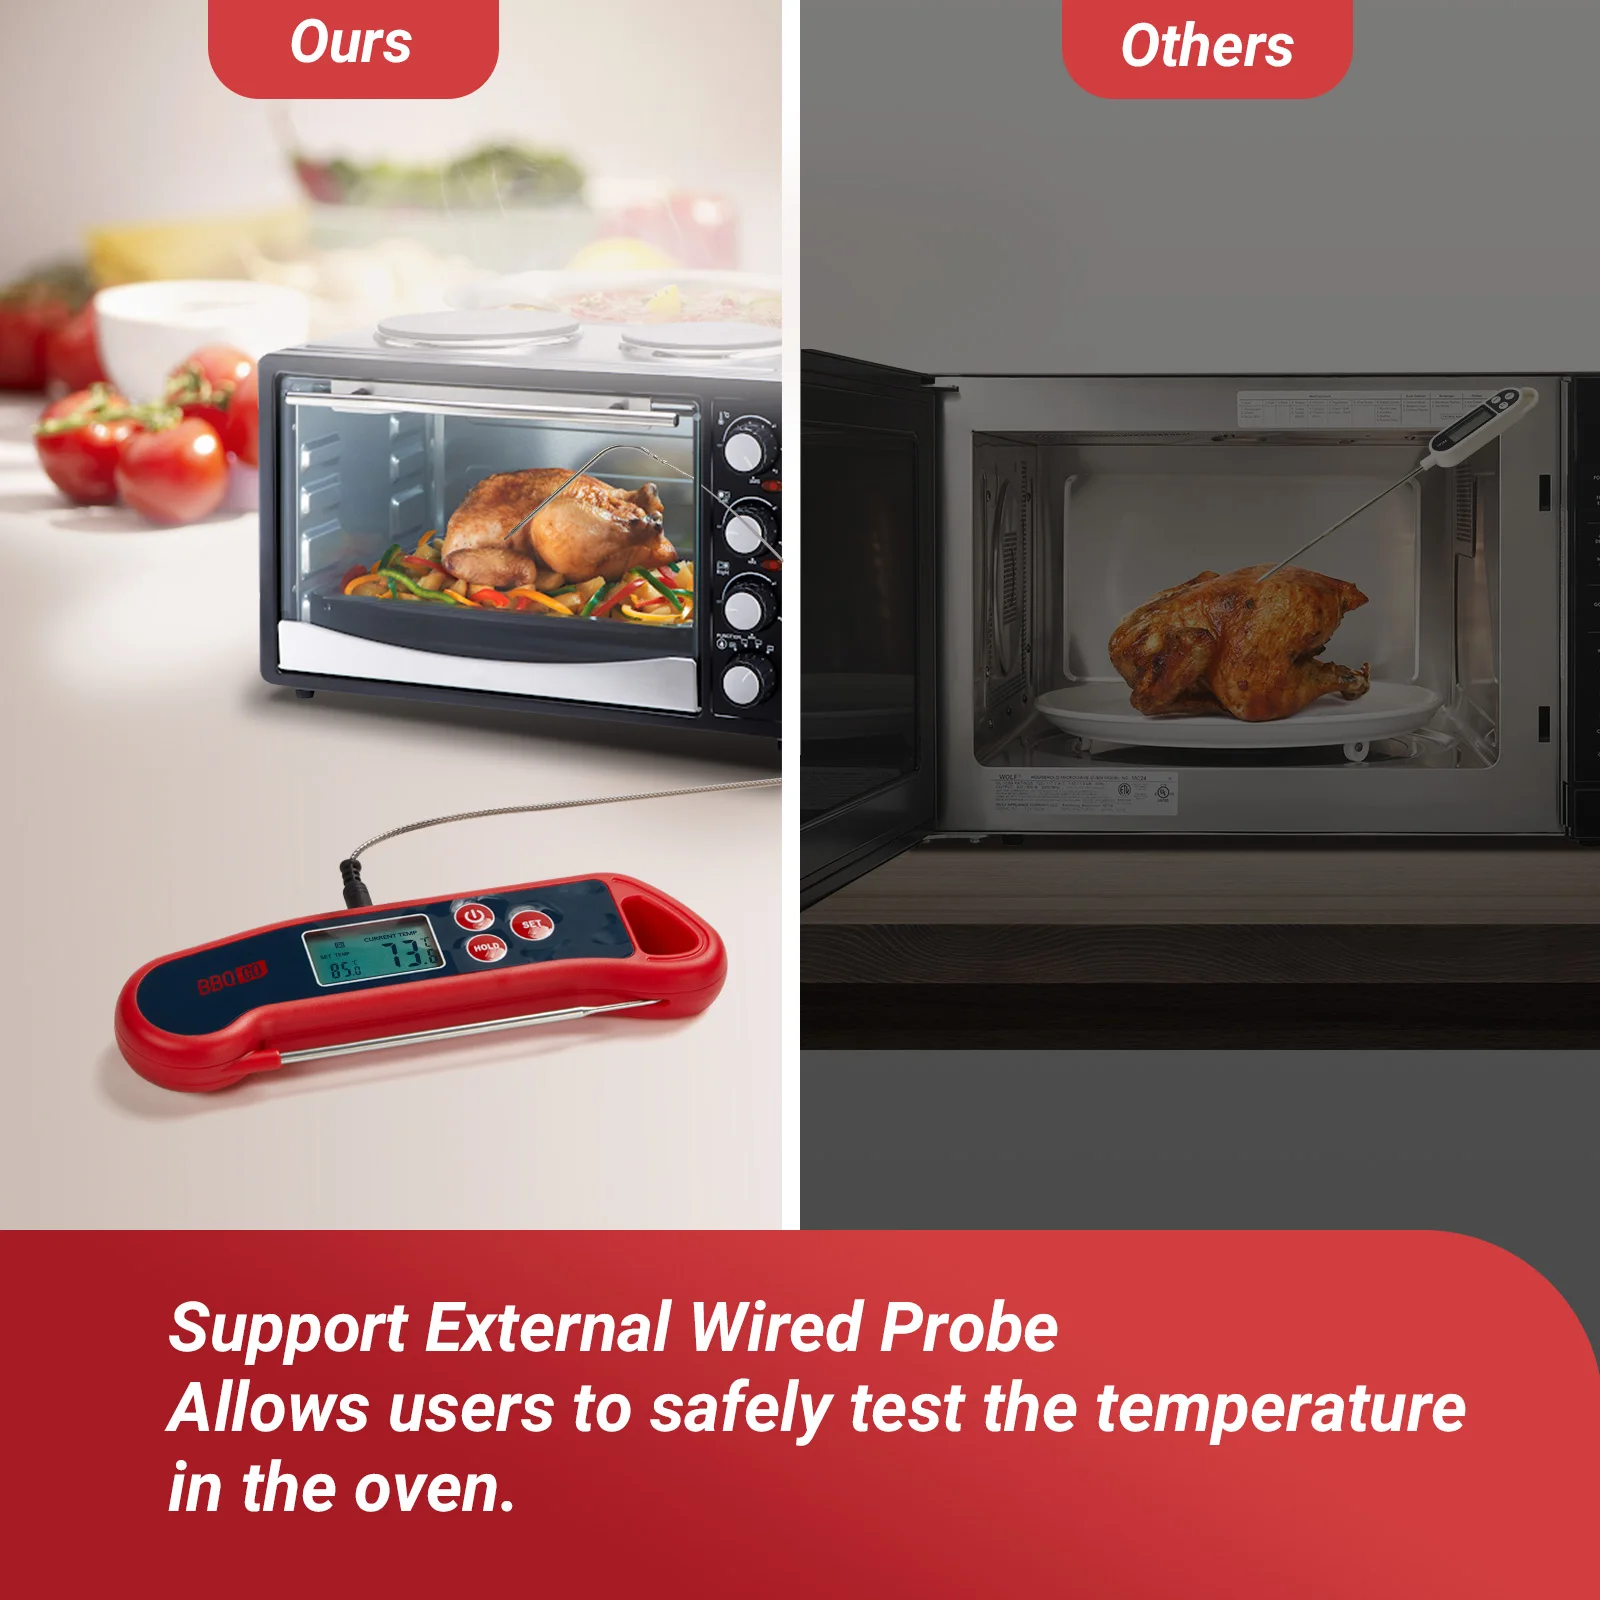 https://ae01.alicdn.com/kf/H8e4b20f1145a4e4fa8cb0a0166845782y/INKBIRD-Digital-BBQ-Thermometer-BG-HH2P-Backlight-LCD-Display-With-Three-Channel-Temperature-Measurement-Function-Alarm.jpg